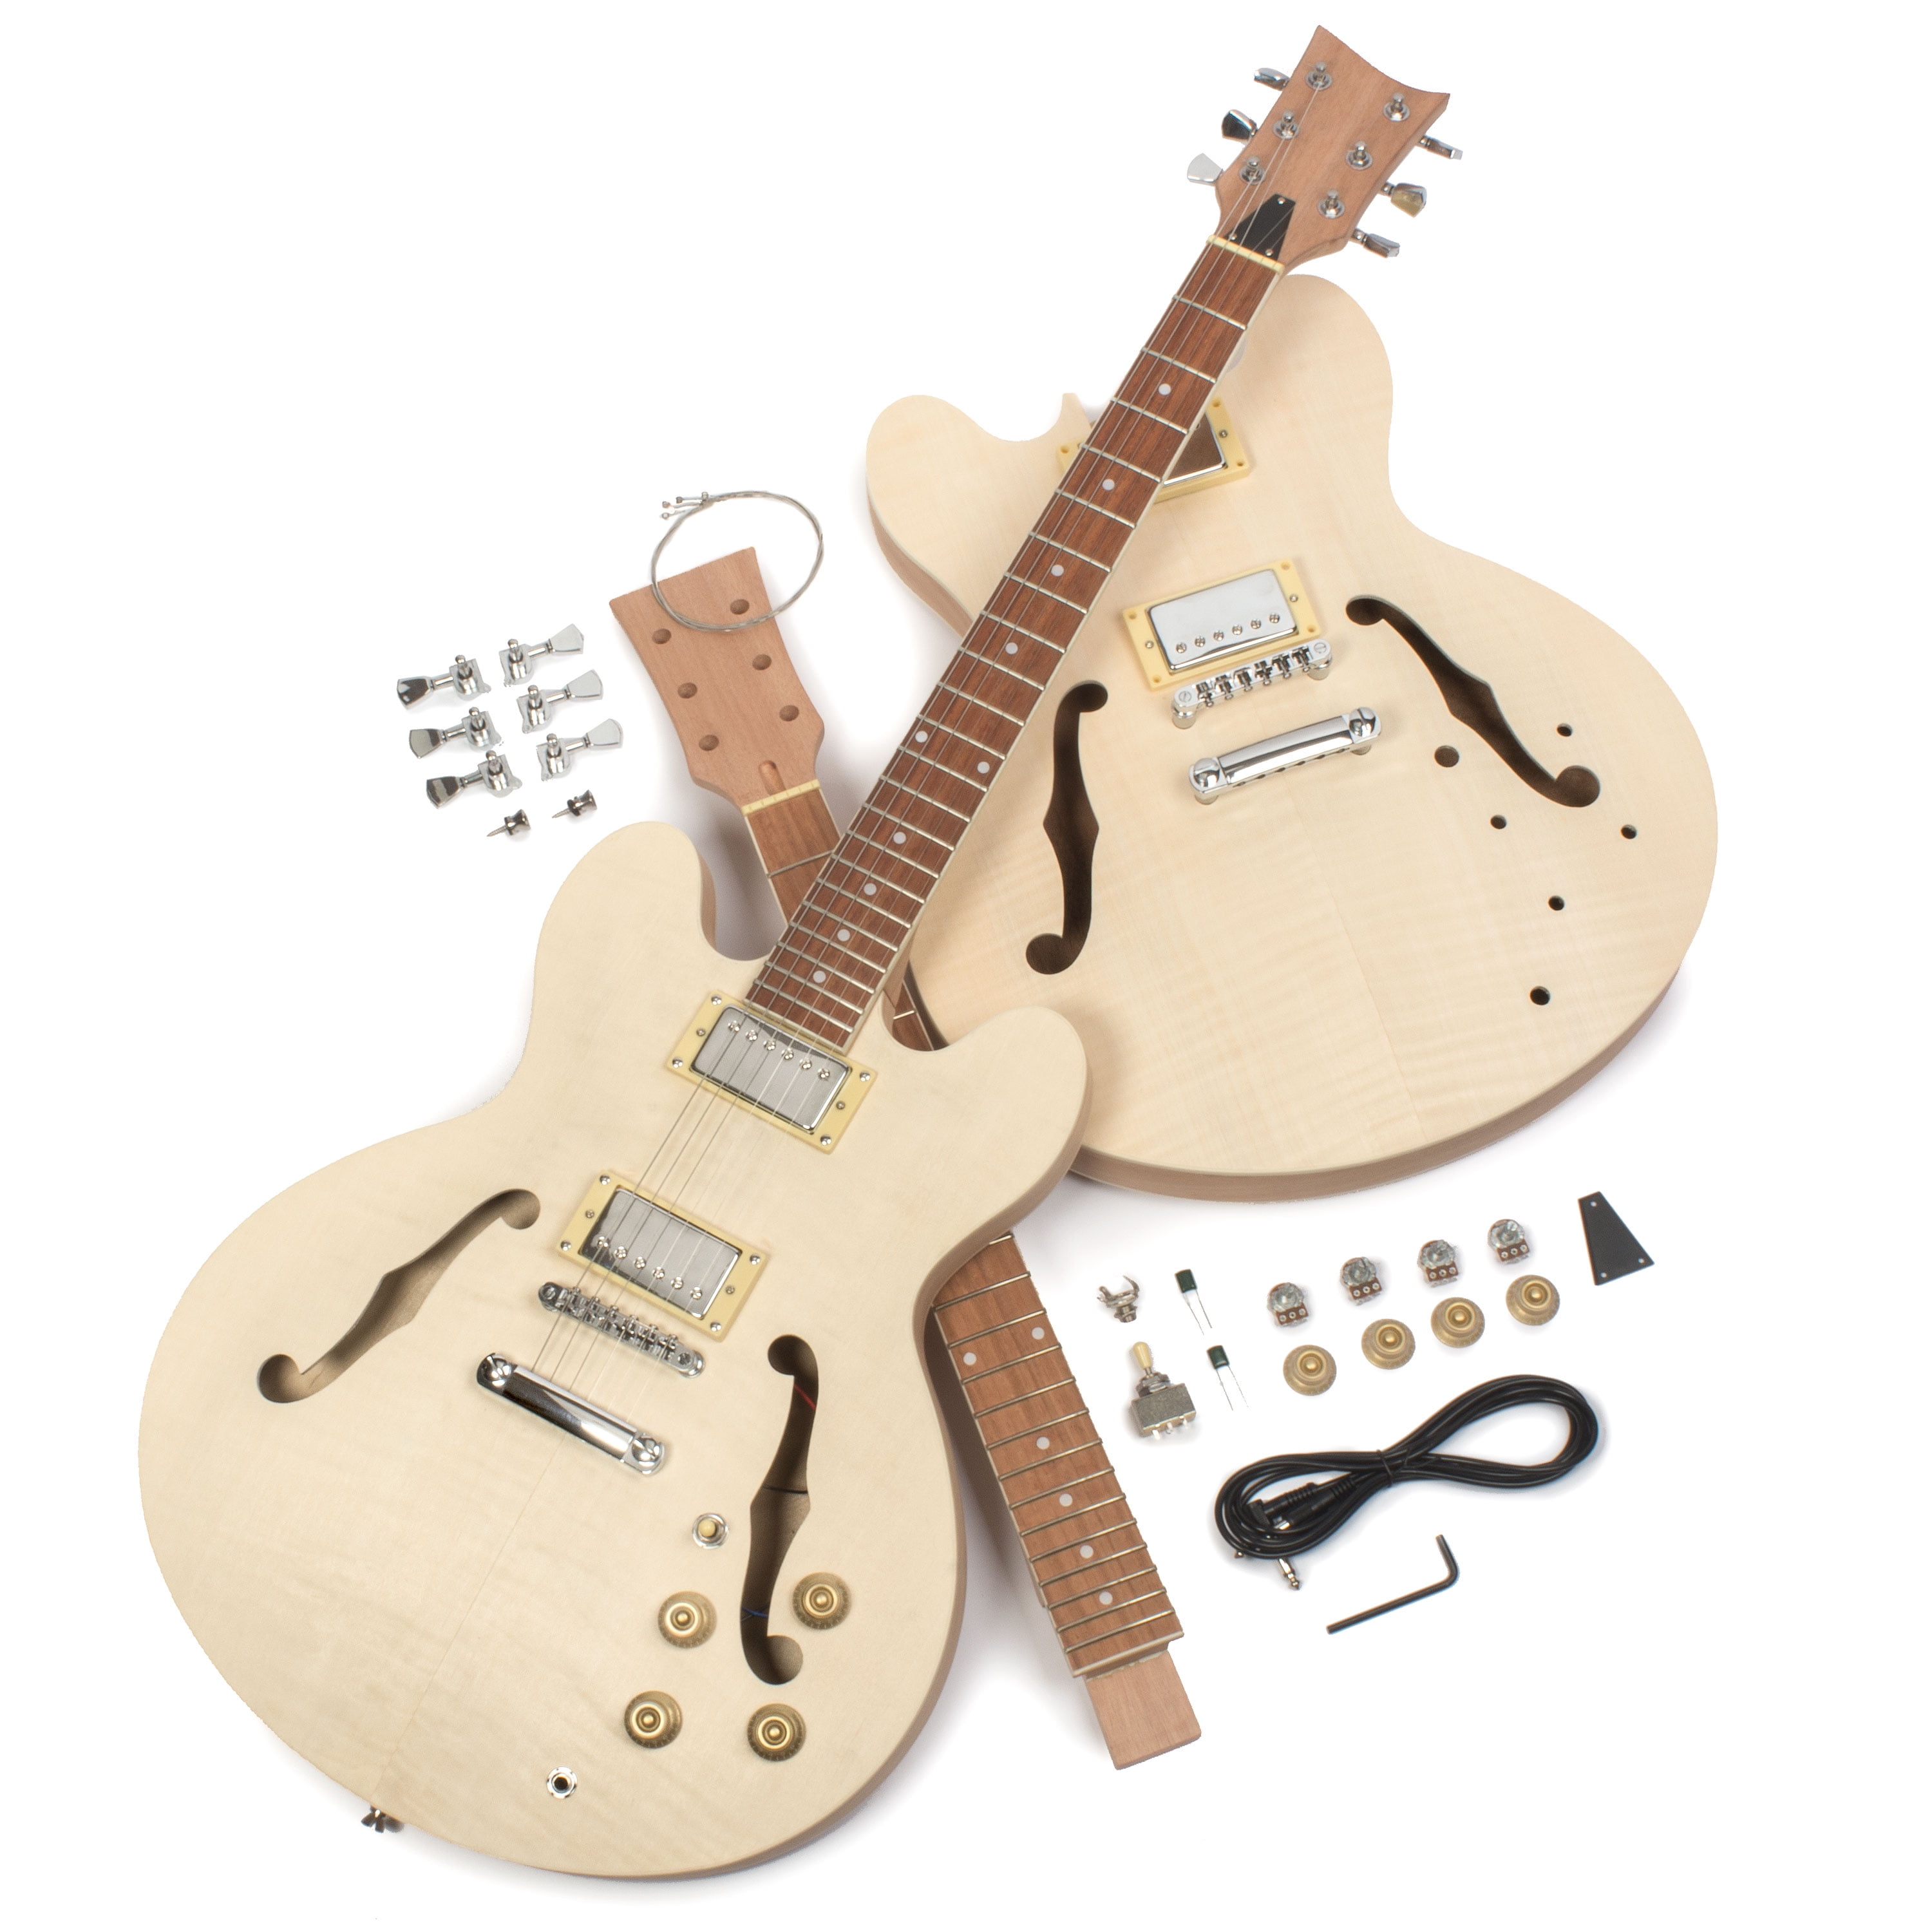 StewMac Build Your Own 335-Style Electric Guitar Kit